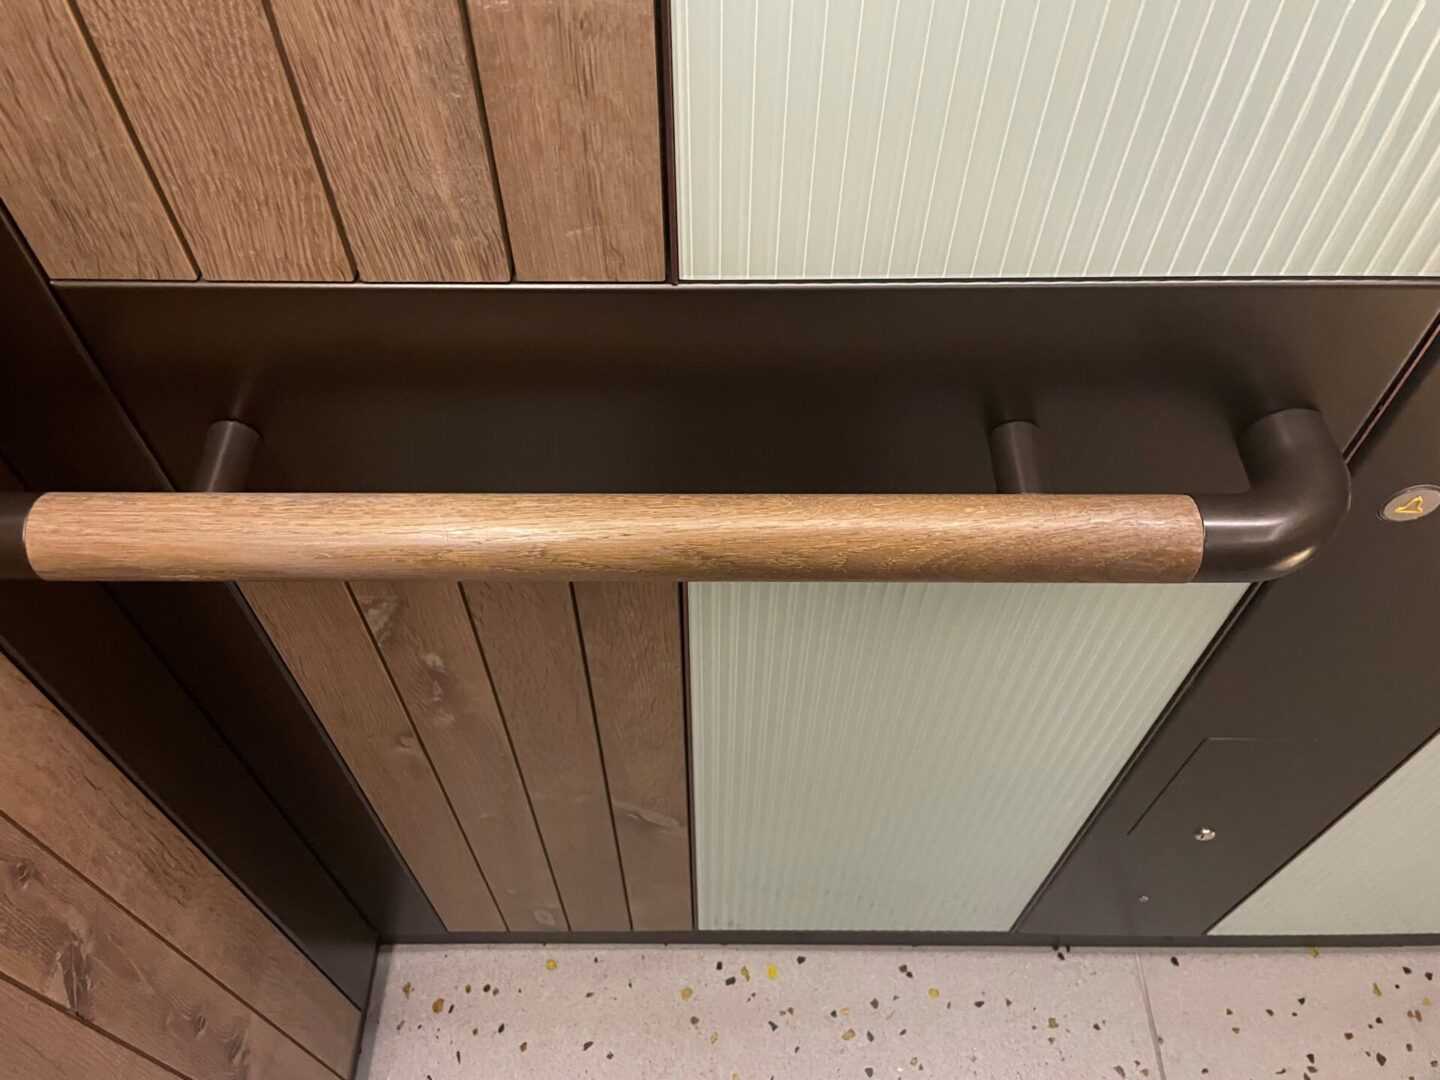 A wooden bat hanging from the ceiling of a room.